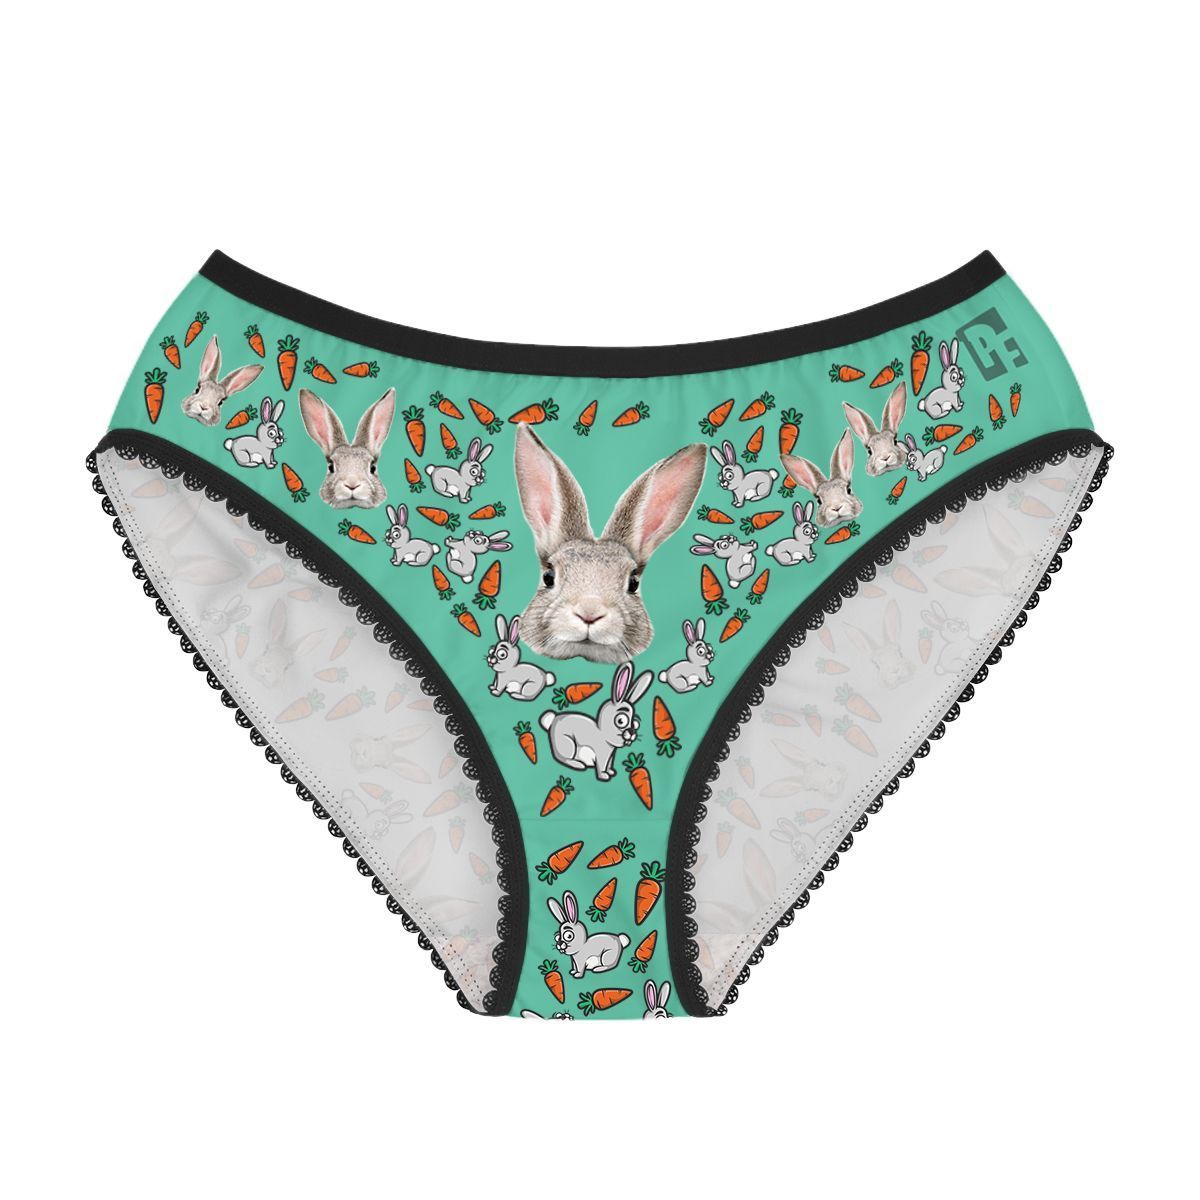 Mint Bunny women's underwear briefs personalized with photo printed on them